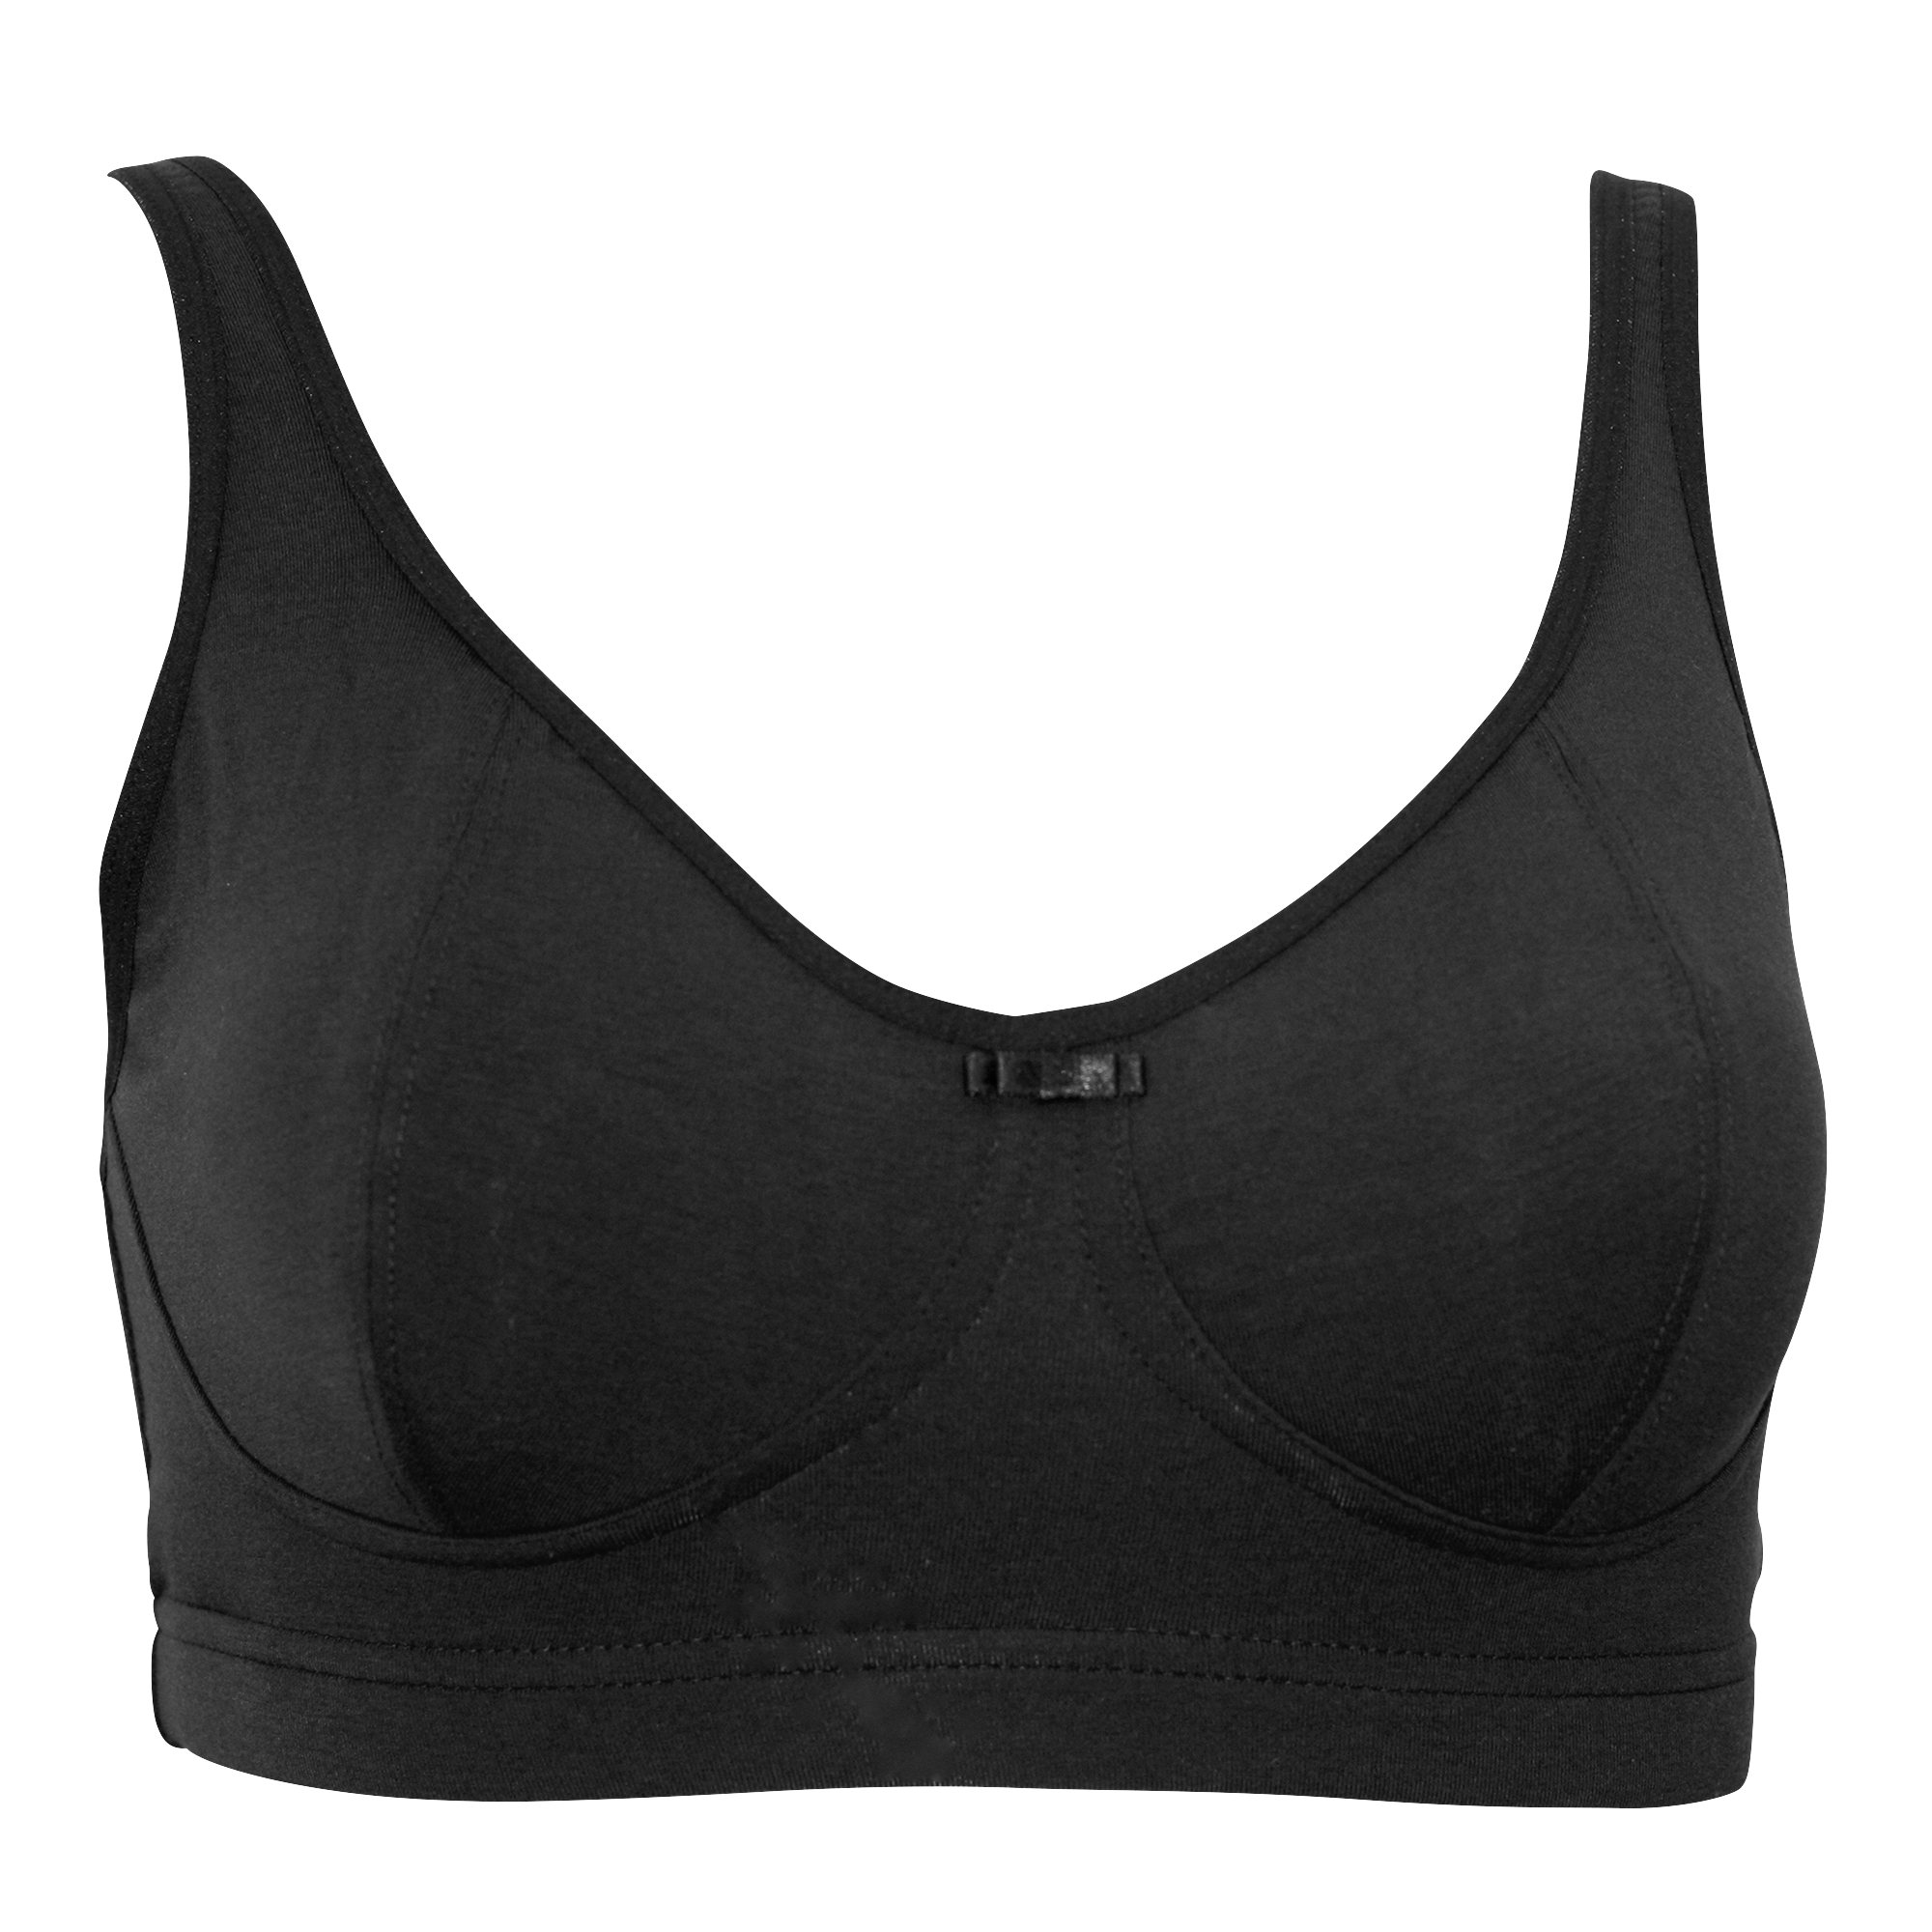 Comfortable bras and underwear your body will love | Bodywise